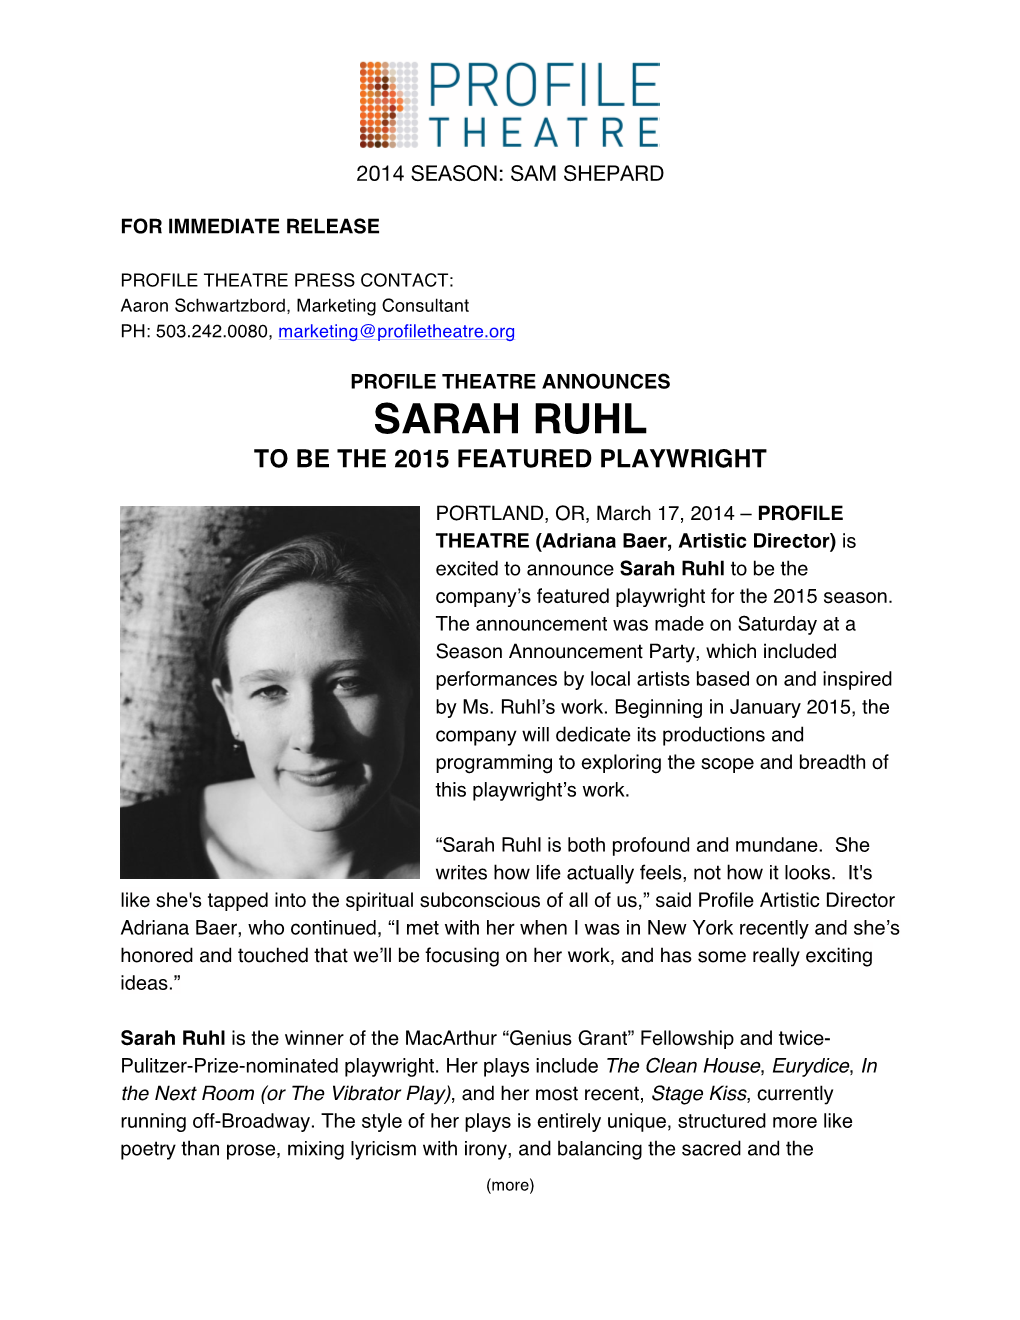 Sarah Ruhl to Be the 2015 Featured Playwright